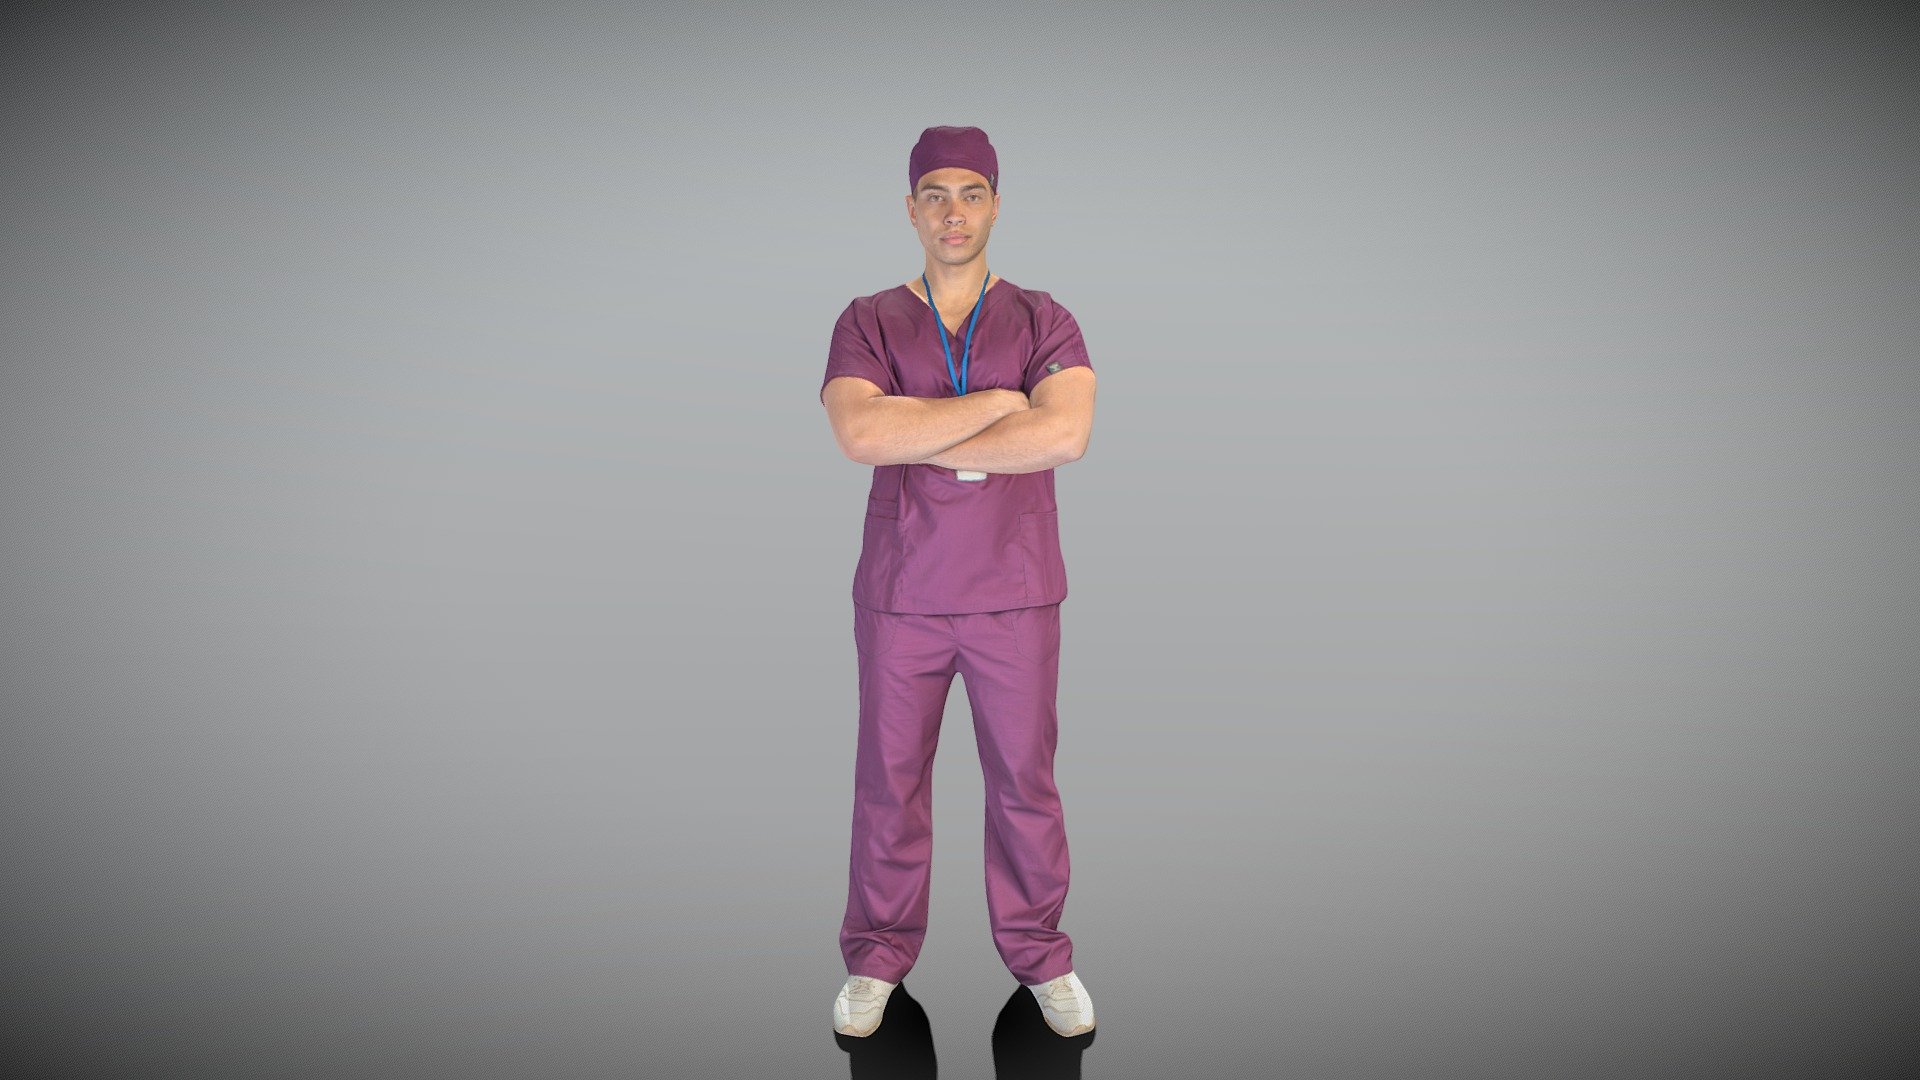 This is a true human size and detailed model of a handsome man of Caucasian appearance dressed in a medical uniform. The model is captured in typical professional pose to perfectly match a variety of architectural and product visualizations, be used as a background or mid-sized character in advert banners, professional products/devices presentations, educational tutorials, VR/AR content, etc.

Technical specifications:




digital double 3d scan model

150k &amp; 30k triangles | double triangulated

high-poly model (.ztl tool with 5 subdivisions) clean and retopologized automatically via ZRemesher

sufficiently clean

PBR textures 8K resolution: Diffuse, Normal, Specular maps

non-overlapping UV map

no extra plugins are required for this model

Download package includes a Cinema 4D project file with Redshift shader, OBJ, FBX, STL files, which are applicable for 3ds Max, Maya, Unreal Engine, Unity, Blender, etc.

3D EVERYTHING

Stand with Ukraine! - Male doctor standing with crossed arms 424 - Buy Royalty Free 3D model by deep3dstudio 3d model